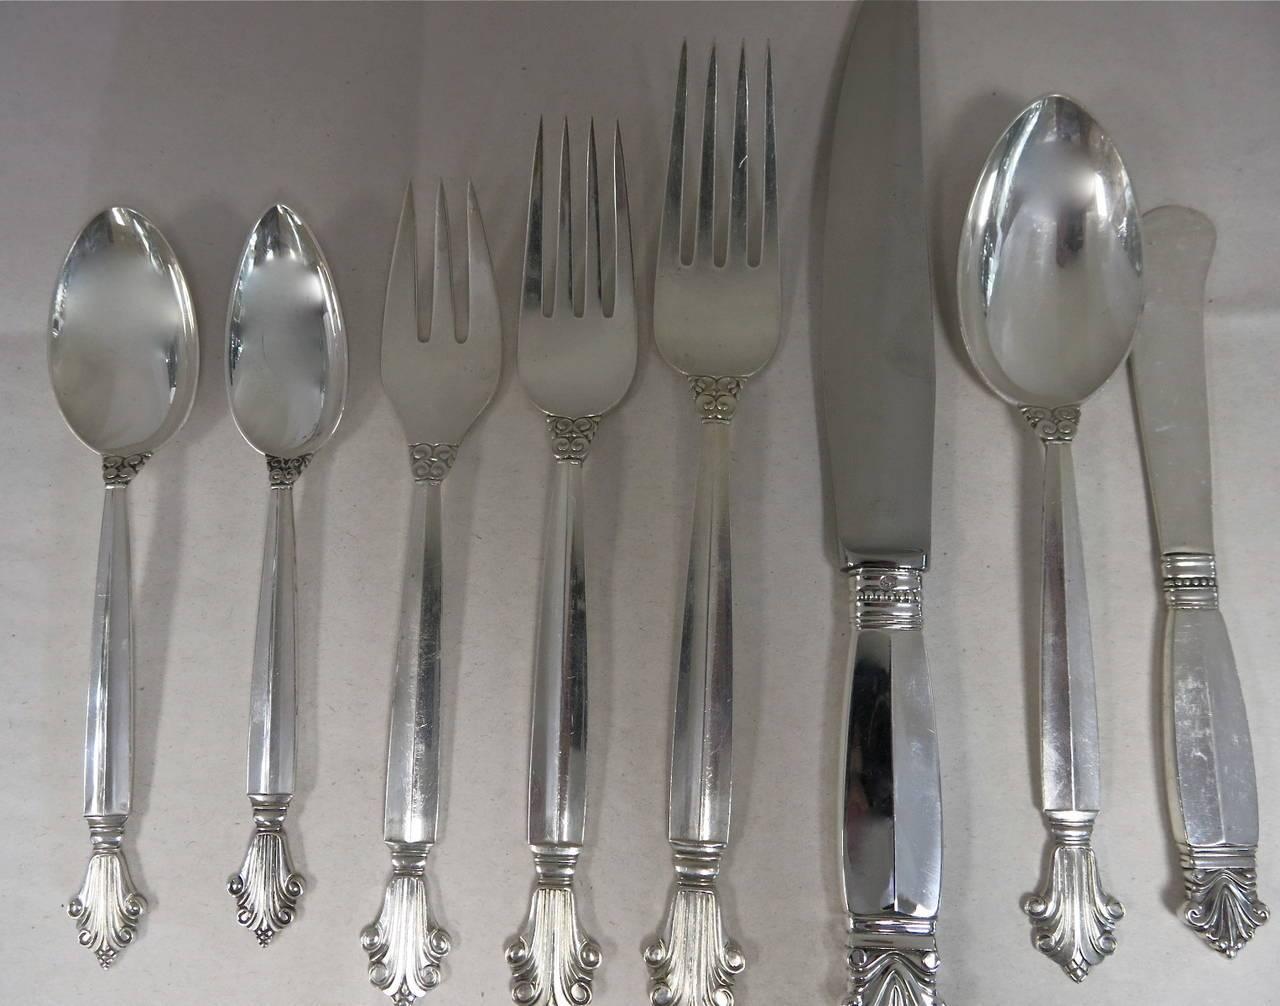 Georg Jensen, Acanthus pattern, sterling silver flatware set, complete for 12 people. Acanthus was designed by Johan Rohde for Jensen in 1917.
Consisting of the following;
12 dinner knives 9